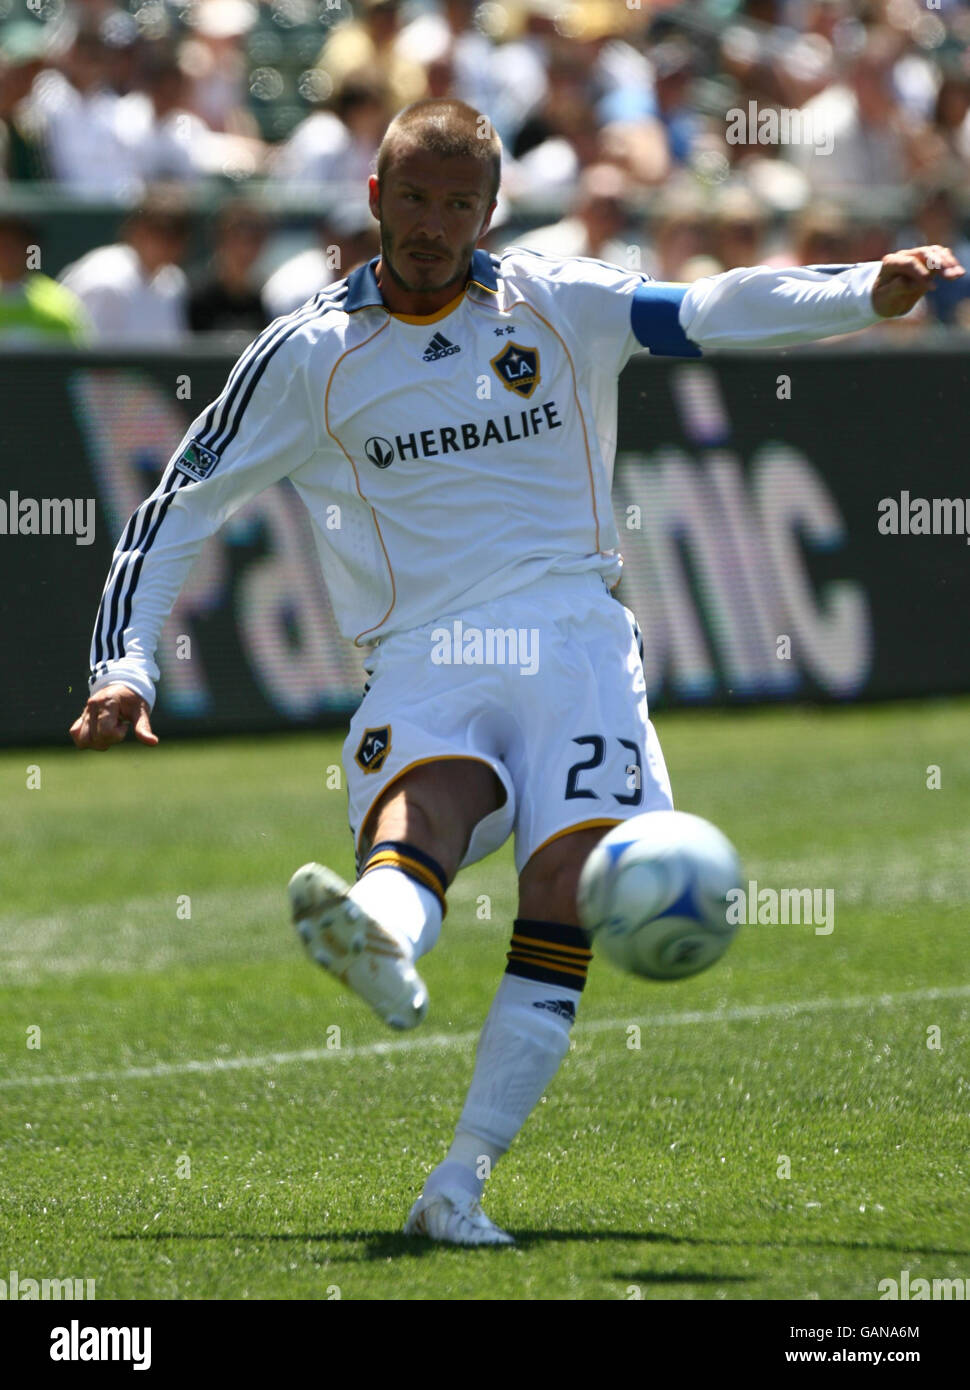 LA Galaxy's David Beckham crosses the ball from wide on the right wing during the Major League Soccer match at the Home Depot Center in Carson, Los Angeles, USA. Stock Photo